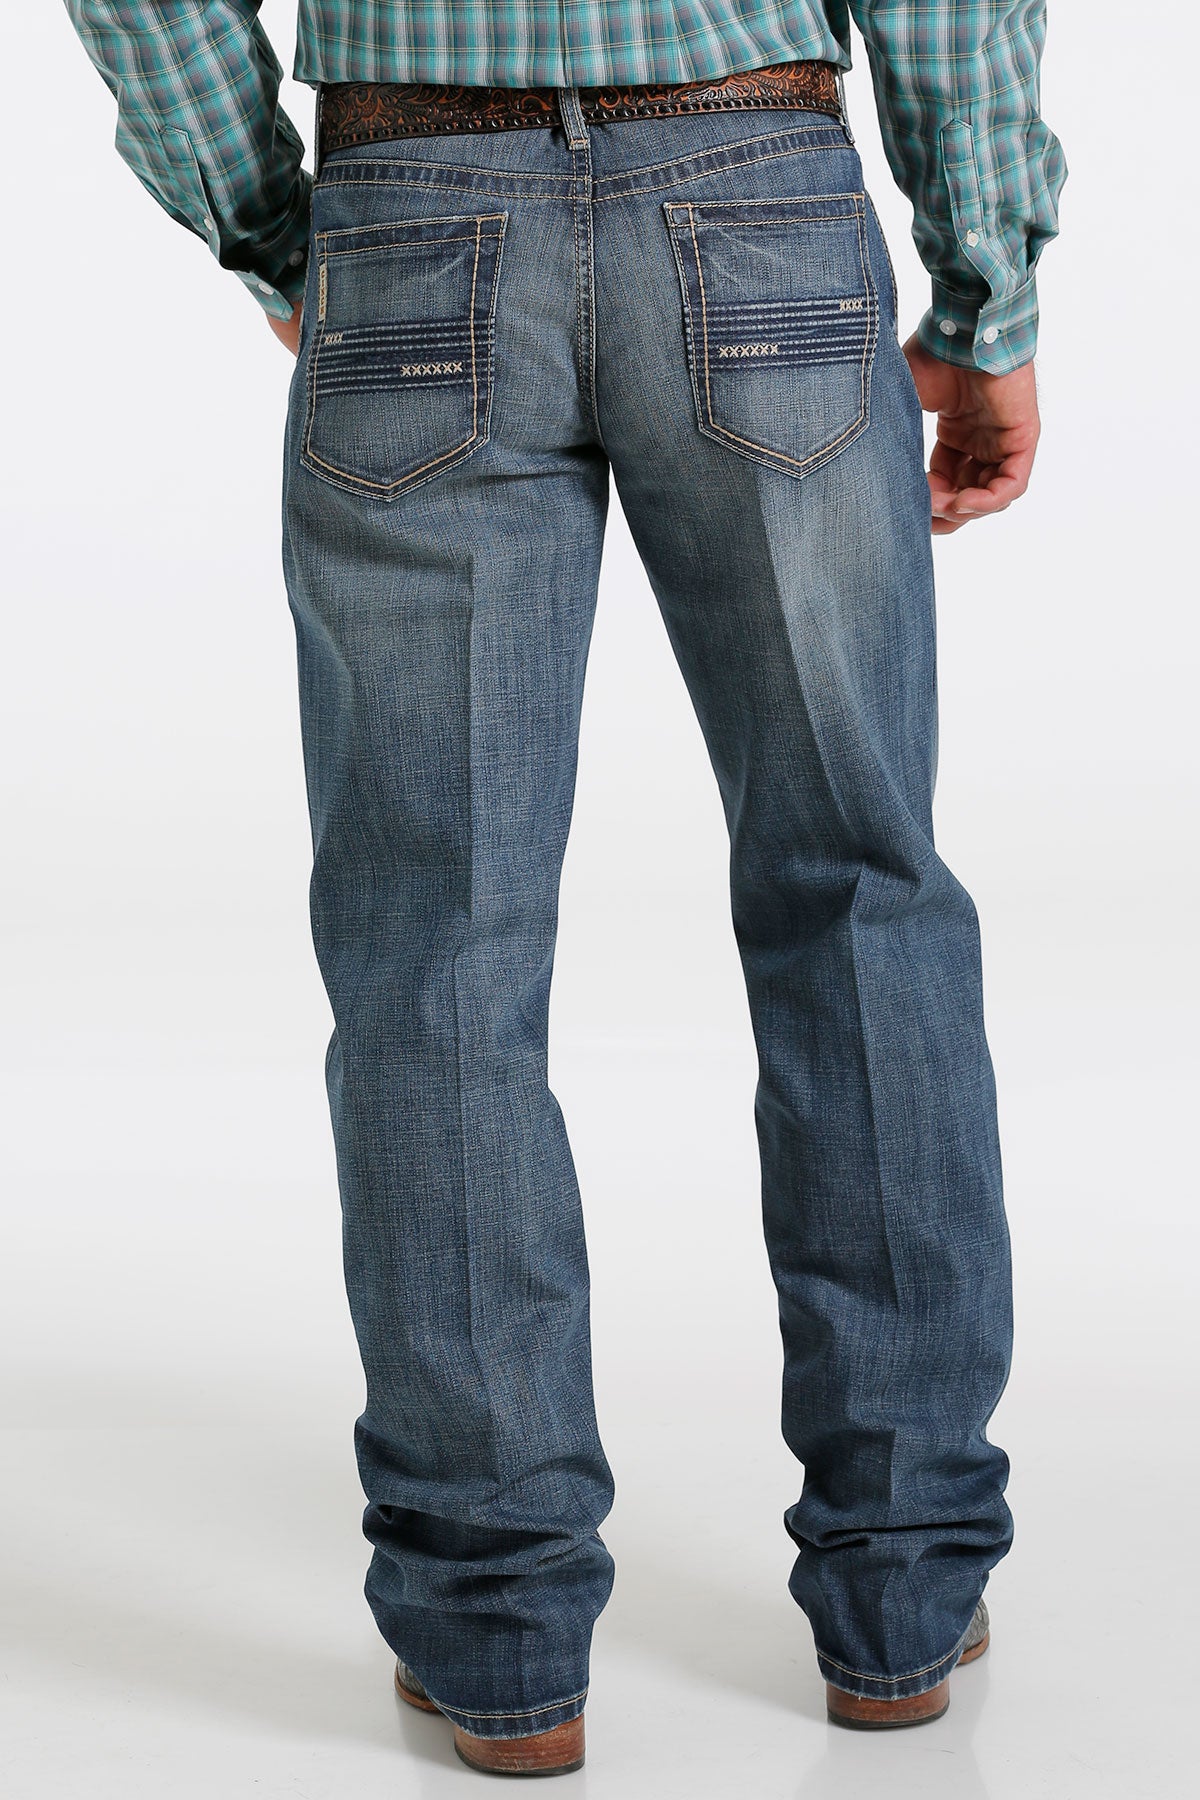 CINCH Men's Relaxed Fit Grant Jeans - Dark Stonewash